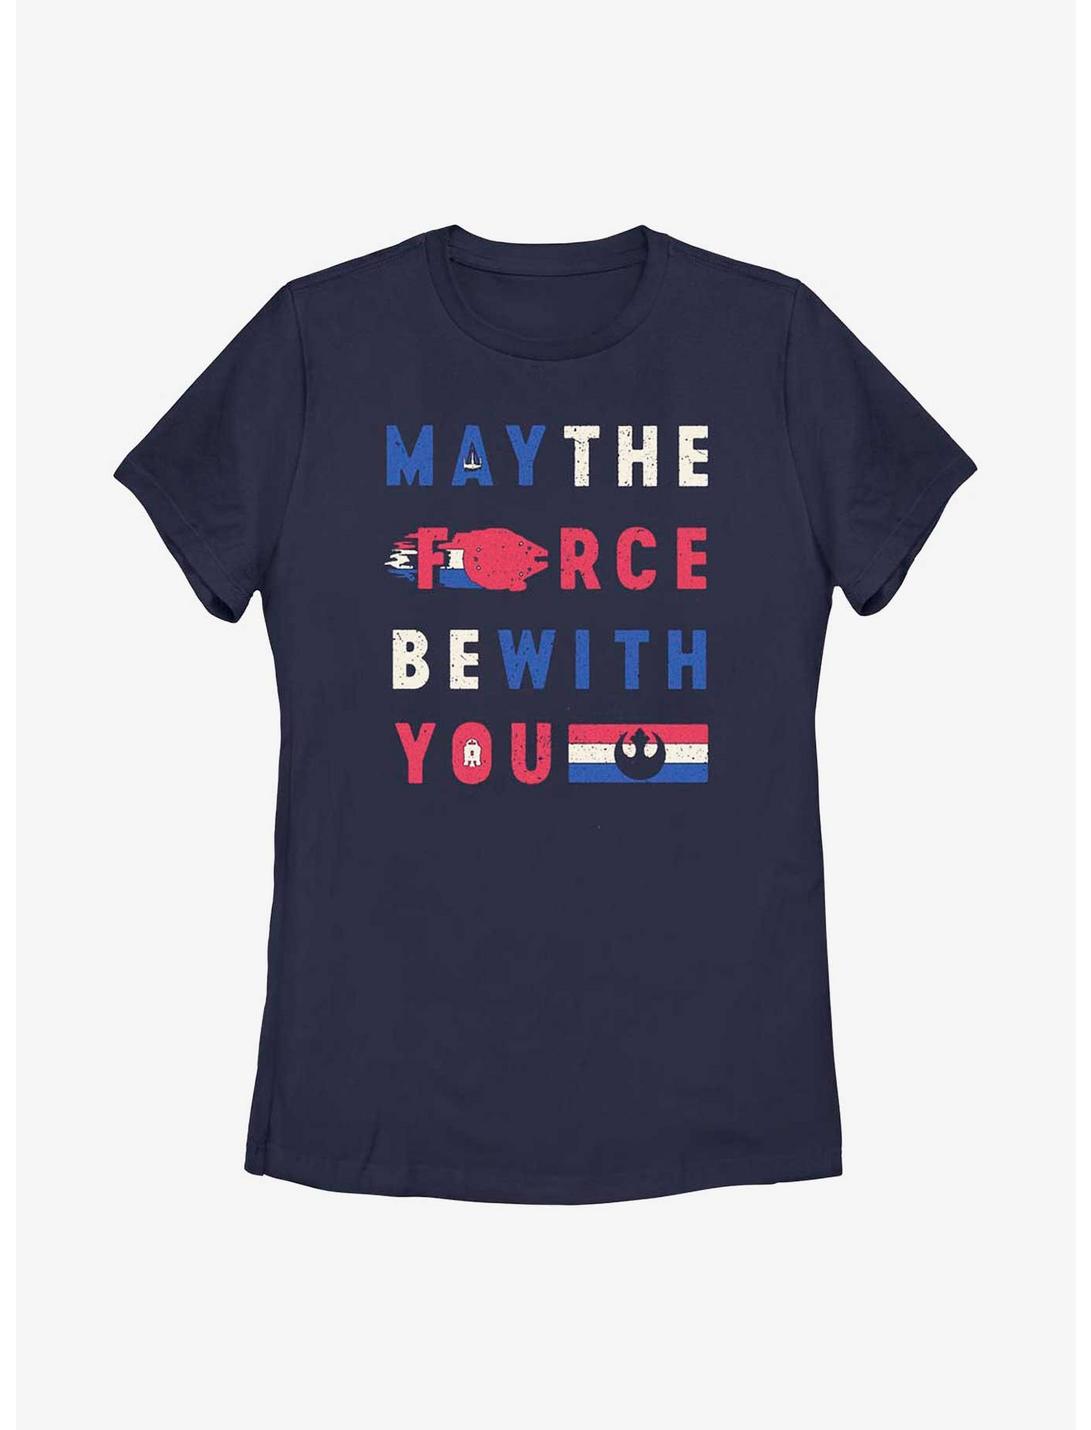 Star Wars May The Force Be With You Womens T-Shirt, NAVY, hi-res